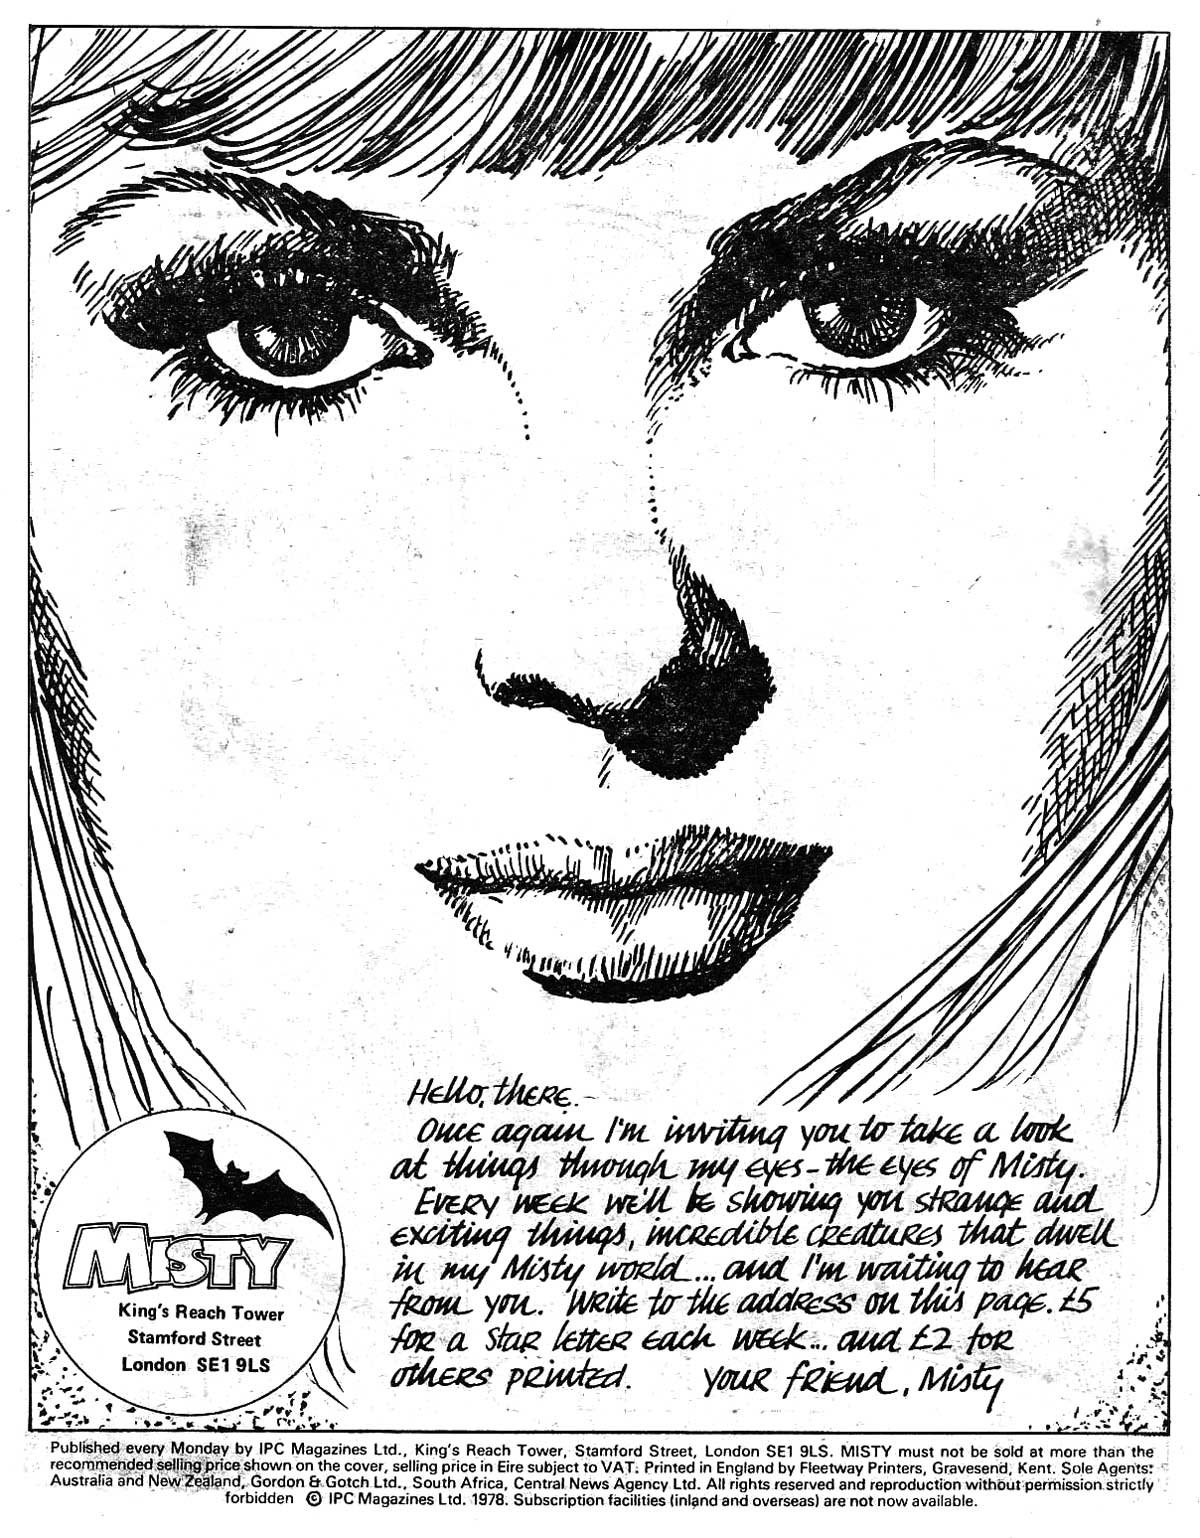 The simple but effective intorduction page to Misty Issue 6, with art by Shirley Bellwood